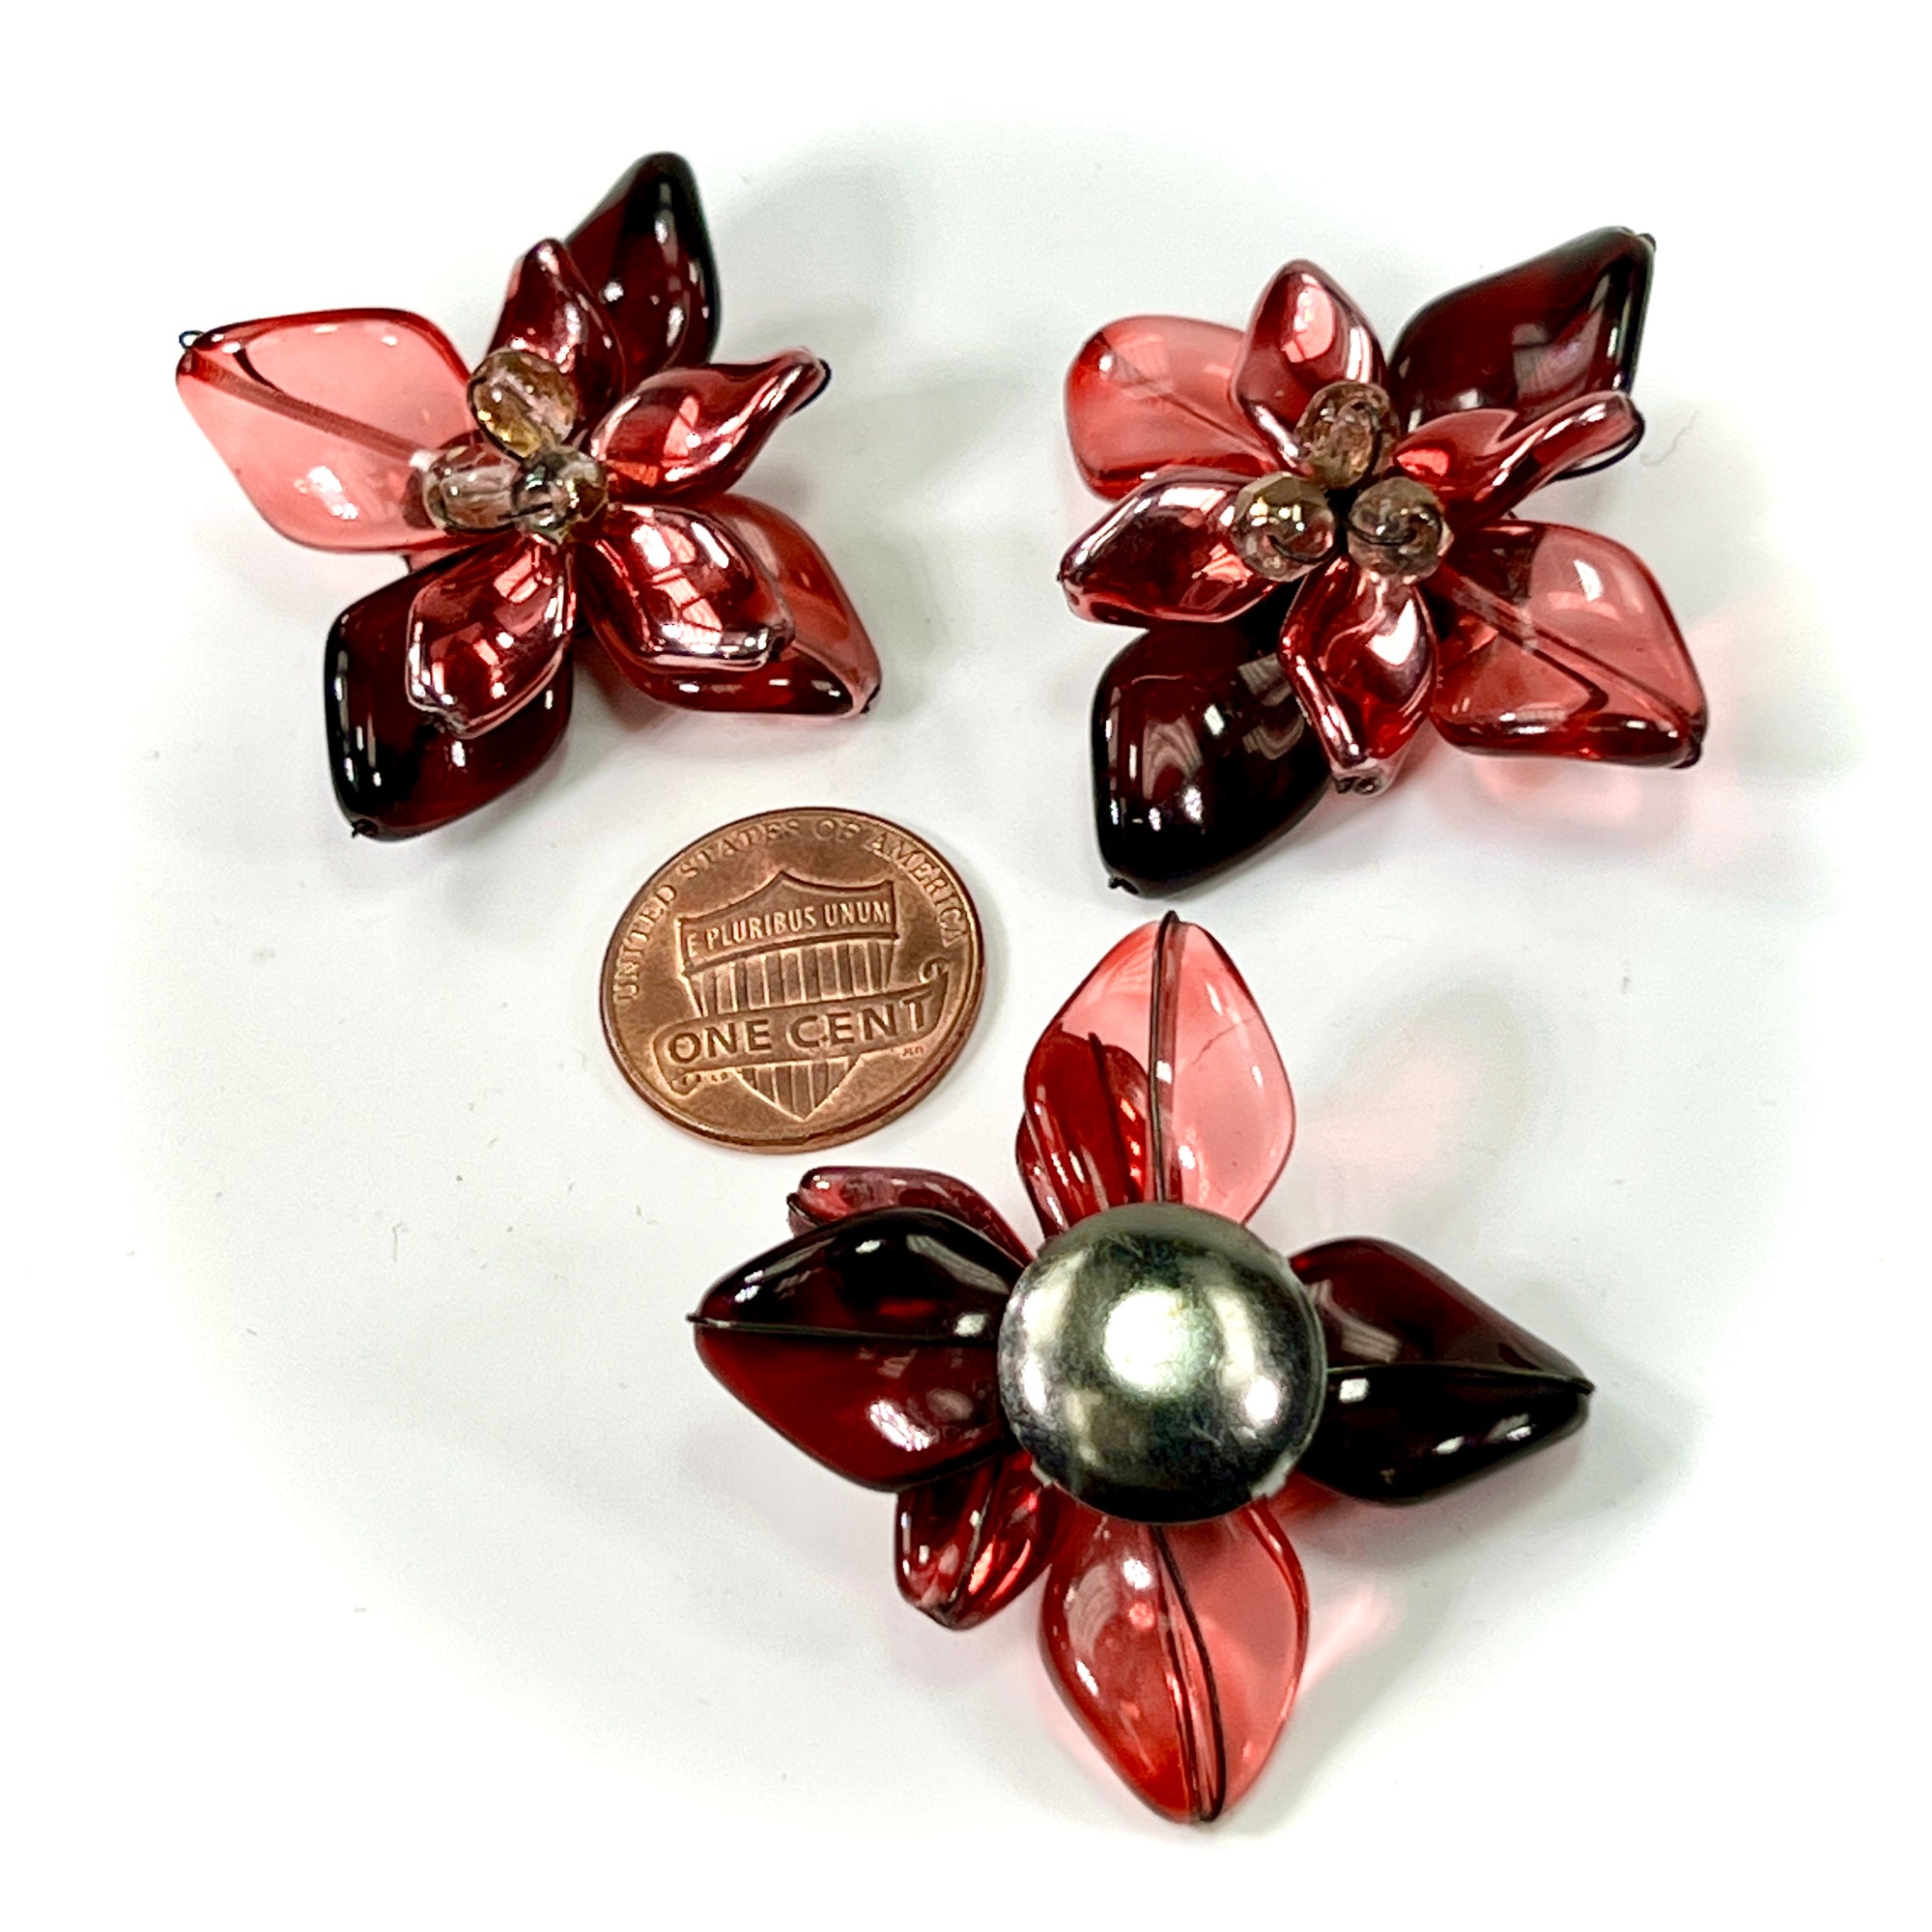 Czech Glass Beads 1.5 inch Flower Ornament Fuchsia and Red Color Combination 1 piece CA025